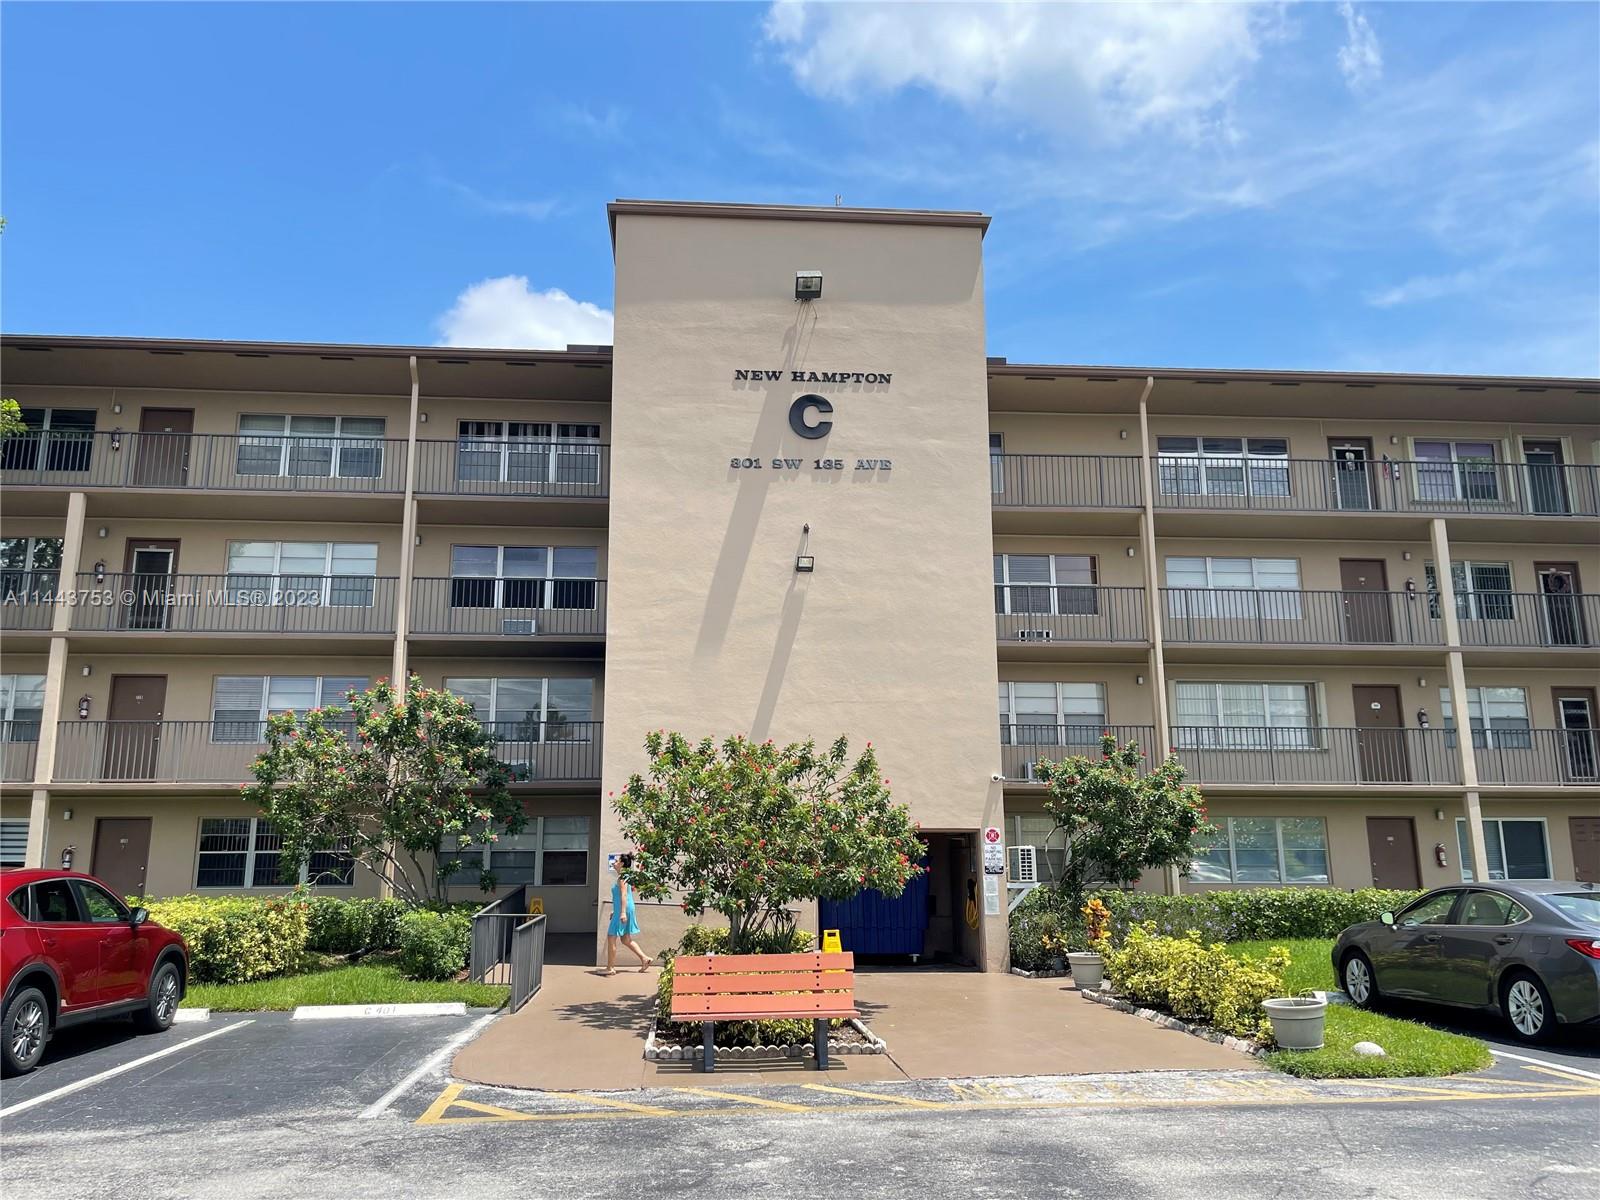 301 SW 135th Ave 405C, Pembroke Pines, Florida 33027, 2 Bedrooms Bedrooms, ,1 BathroomBathrooms,Residential,For Sale,301 SW 135th Ave 405C,A11443753